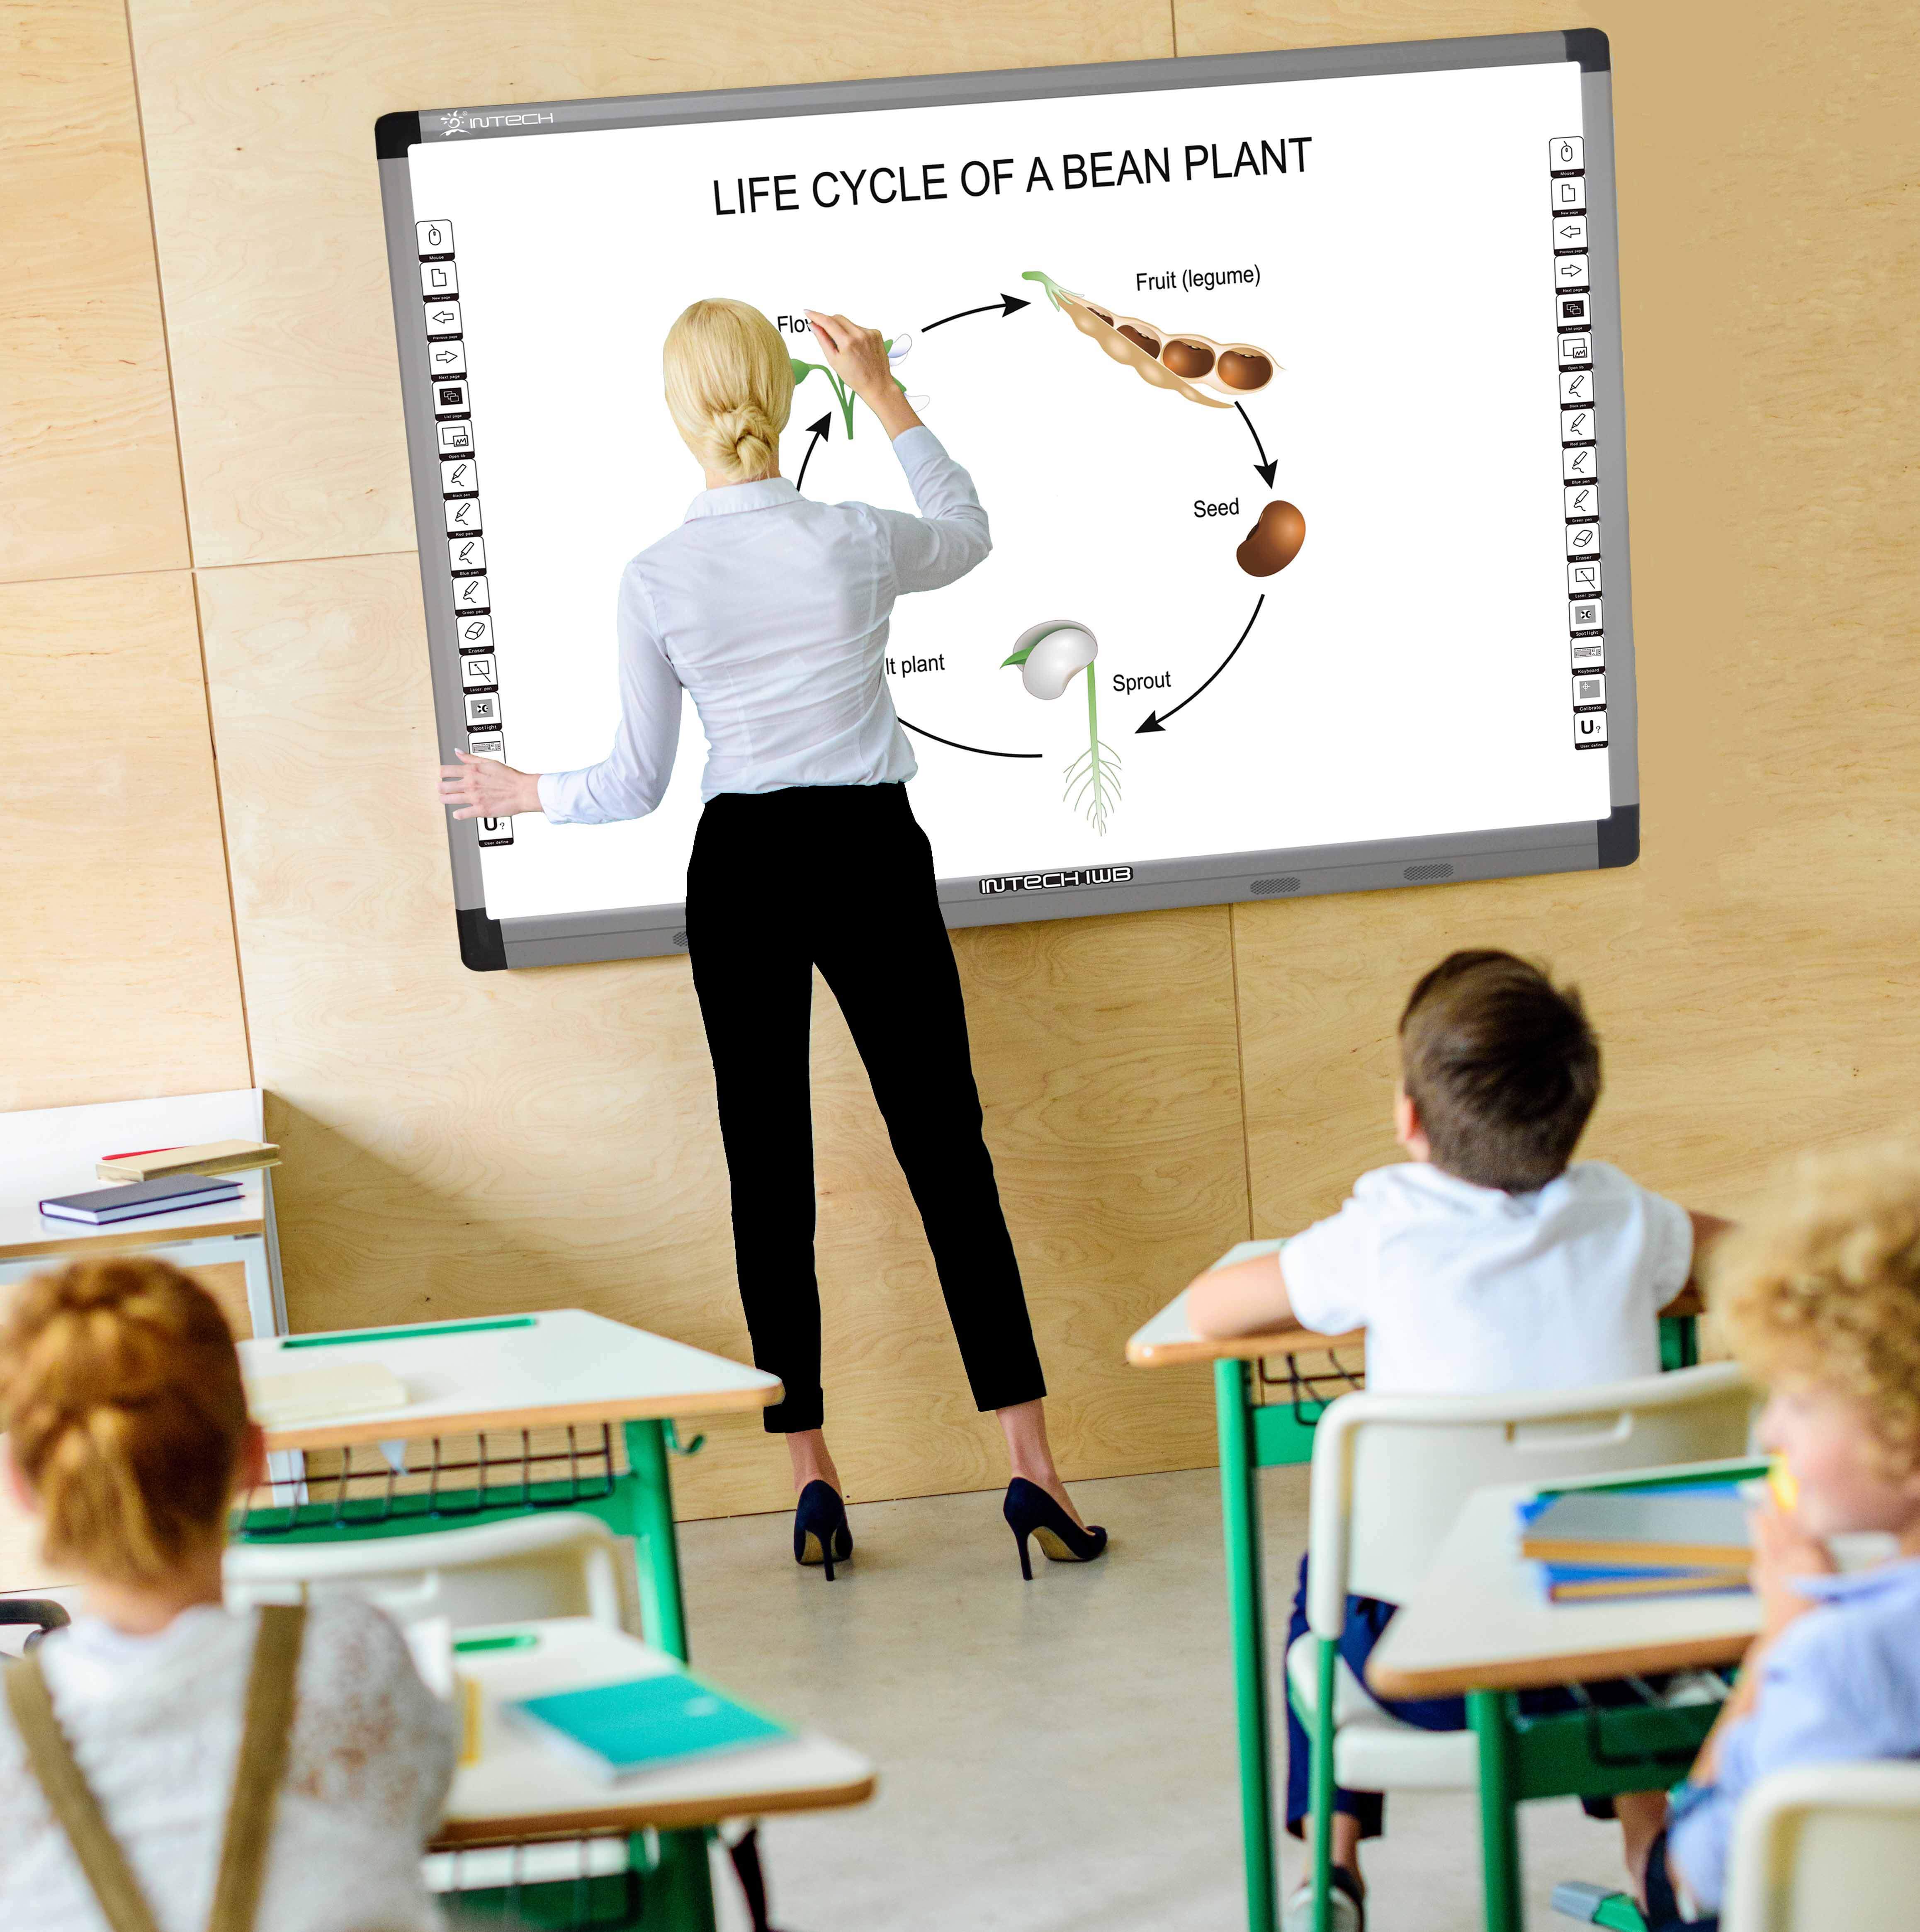 INTECH capacitive whiteboard in the classroom